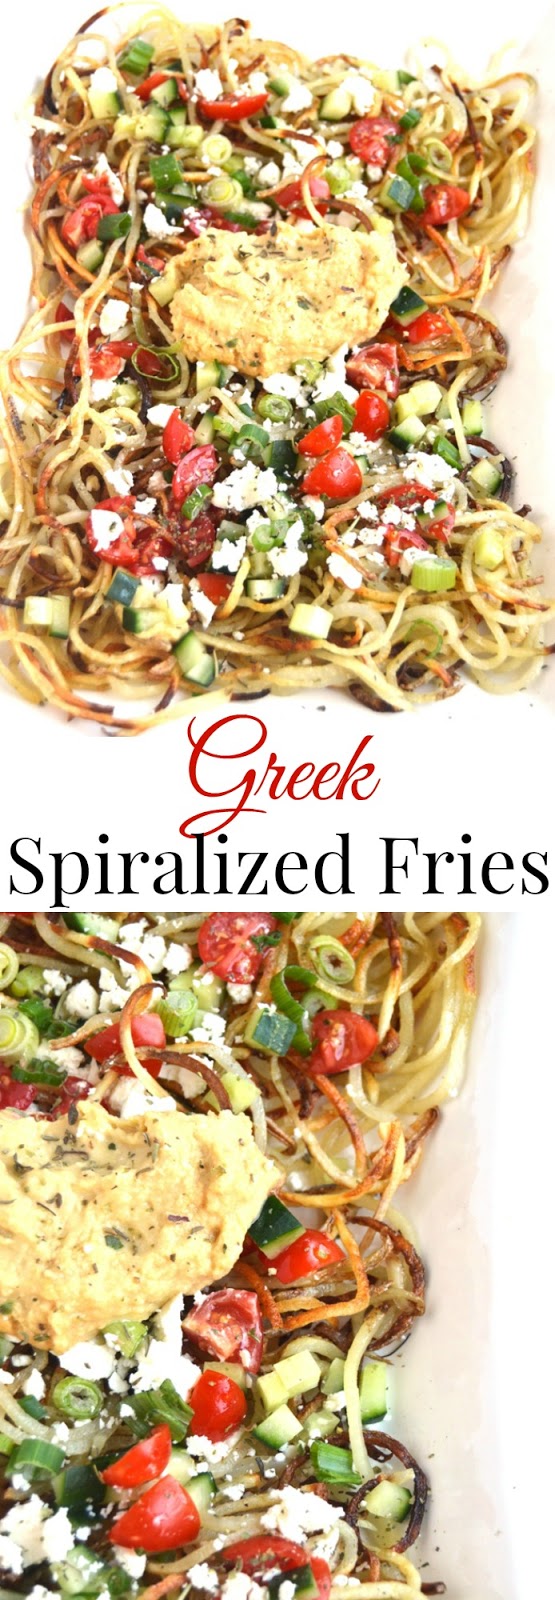 Greek Spiralized Fries are crispy, flavorful and loaded with your favorite toppings including cucumber, hummus, tomatoes, feta cheese and green onions! www.nutritionistreviews.com